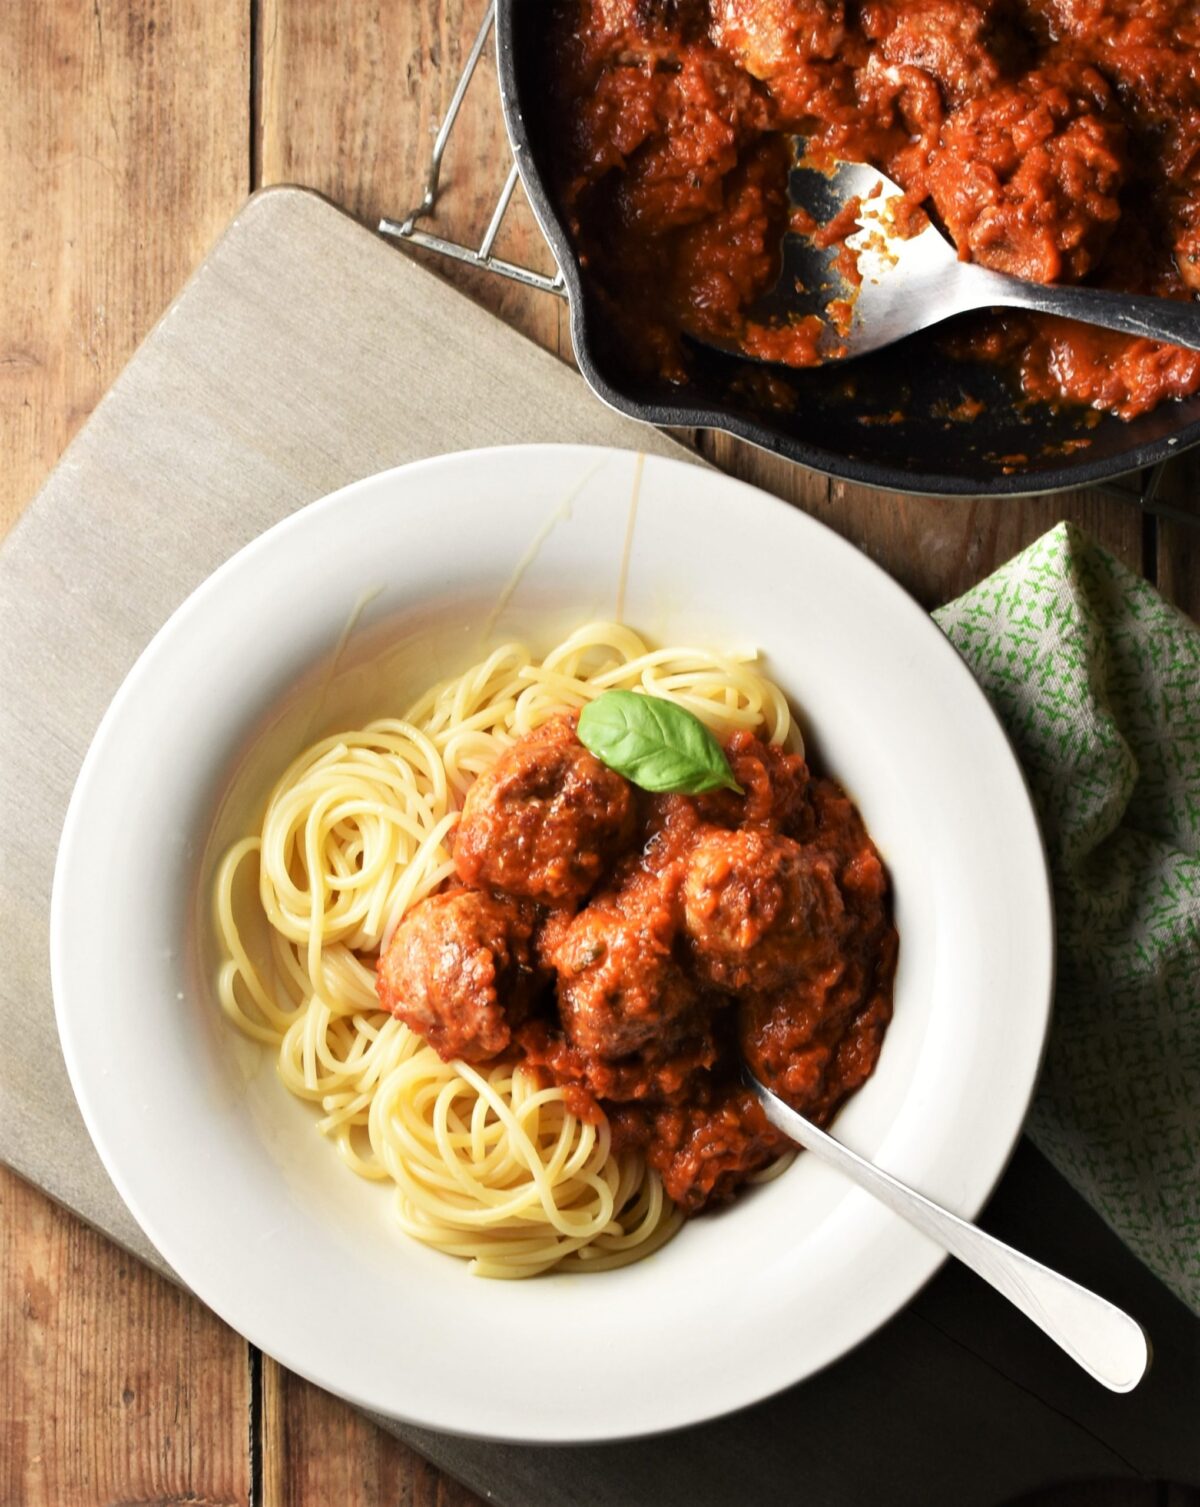 Meatballs in tomato sauce over spaghetti in bowl with fork and meatballs in sauce in pan in top right corner.